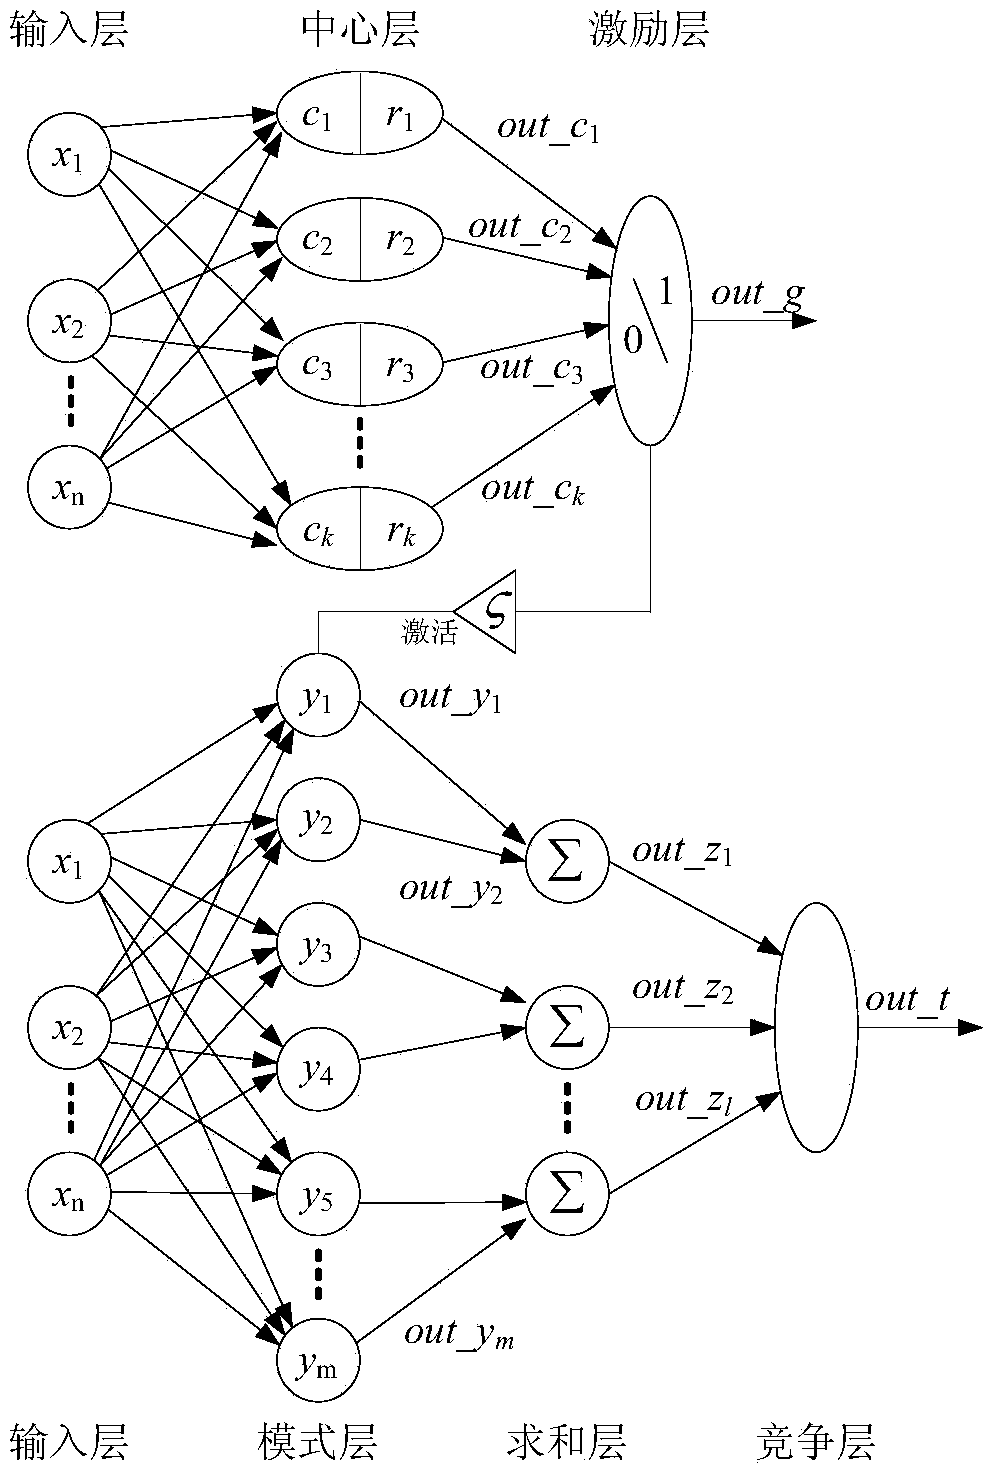 Pattern recognition method based on self-adaptation correction neural network